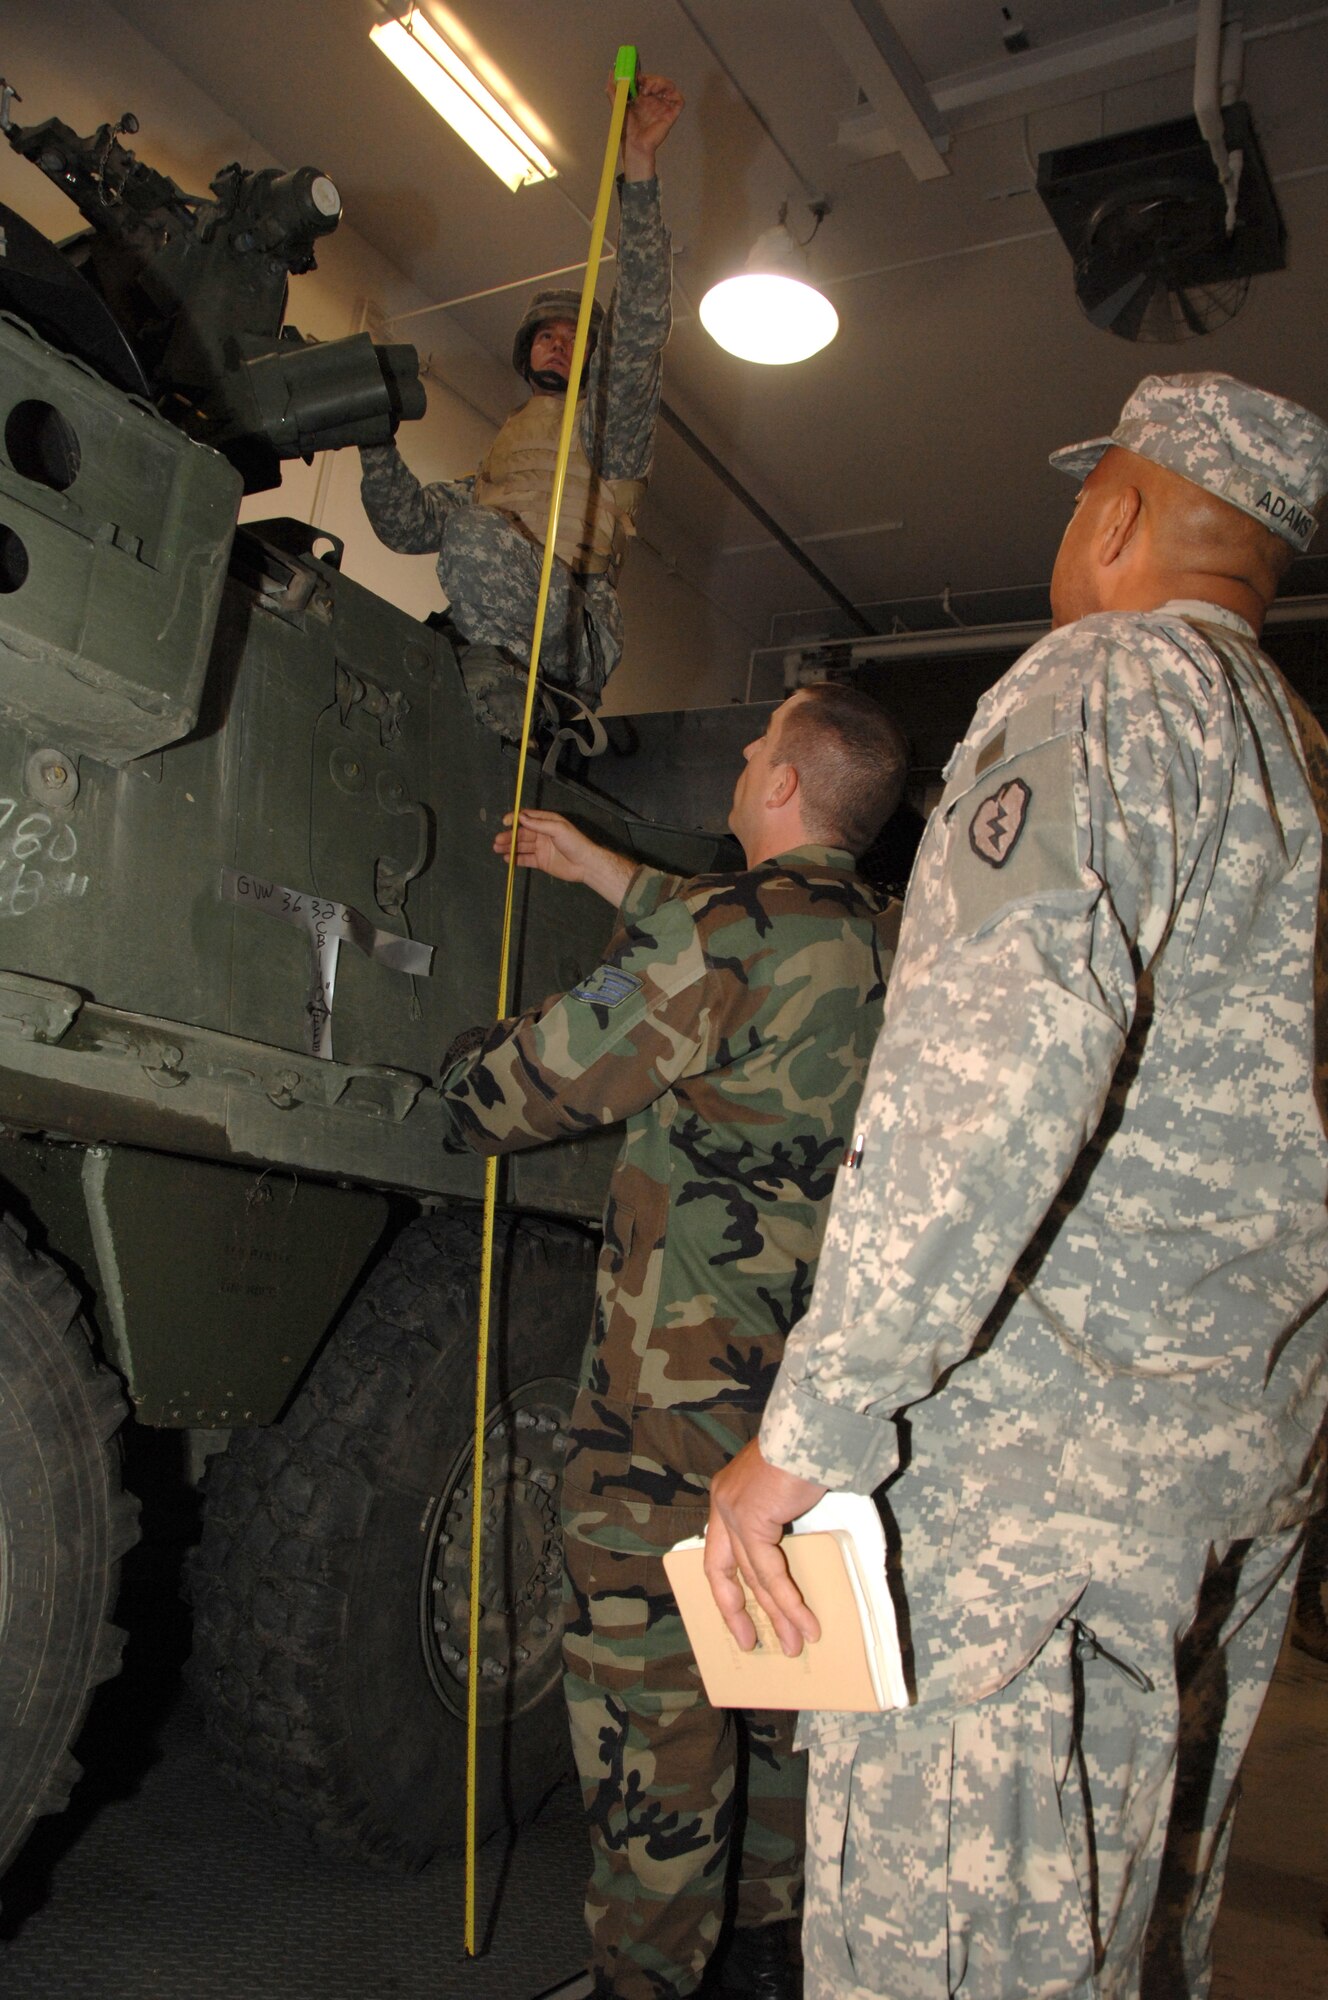 EIELSON AIR FORCE BASE, Alaska -- Staff Sgt. Brad DeVinney, 354th Logistic Readiness Squadron, and soldiers of the 1/25 Stryker Brigade Team, work together to find the dimensions of a Stryker Combat Vehicle Sept. 19, 2007 at the ammunition processing facility adjacent to the Eielson Joint Mobility Complex. Eielson's 354th Logistic Readiness Squadron personnel conducted a joint training event to orientate Stryker personnel on aerial movement preparation of the Stryker Combat Vehicle. This was the first time Icemen and Arctic Wolves teamed up to conduct joint mobility training featuring Eielson as an aerial port of embarkation.  (U.S. Air Force photo by Airman 1st Class Christopher Griffin)